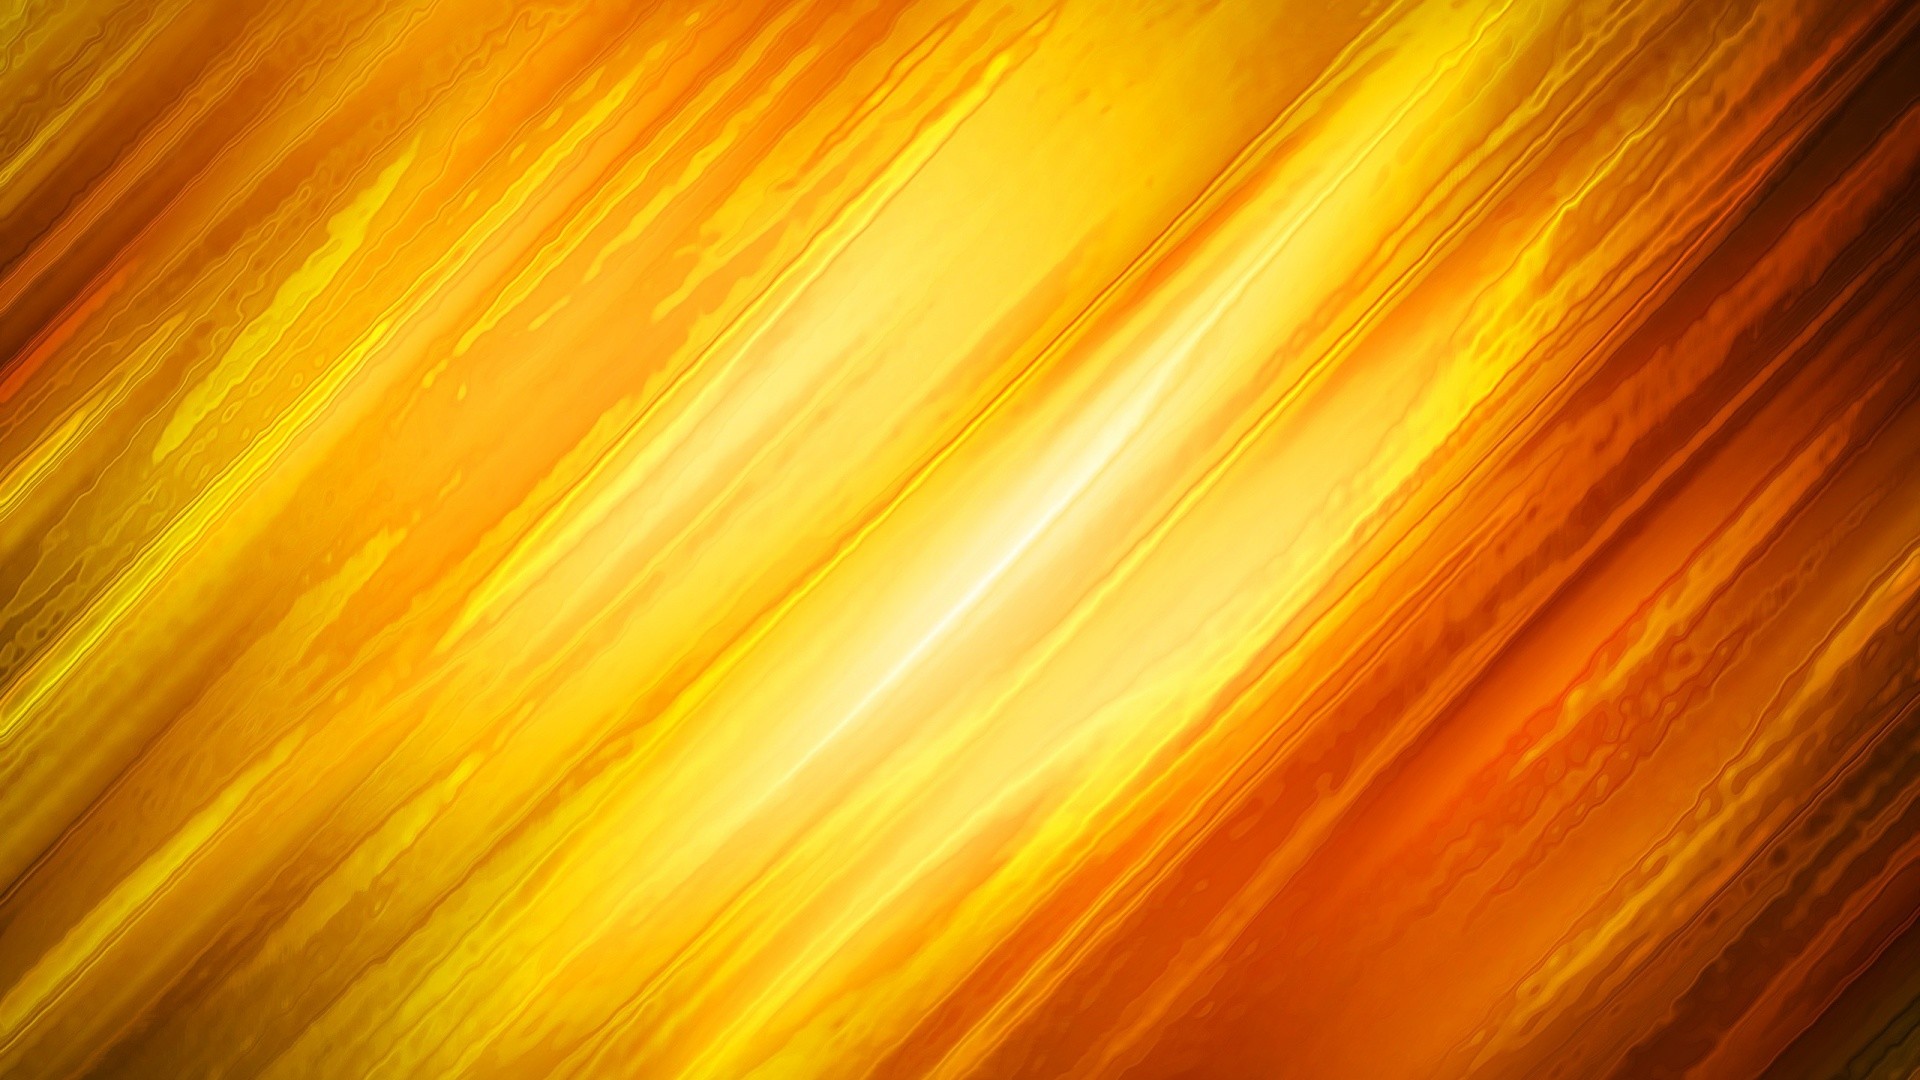 Wallpapers background orange yellow abstract 1920×1080